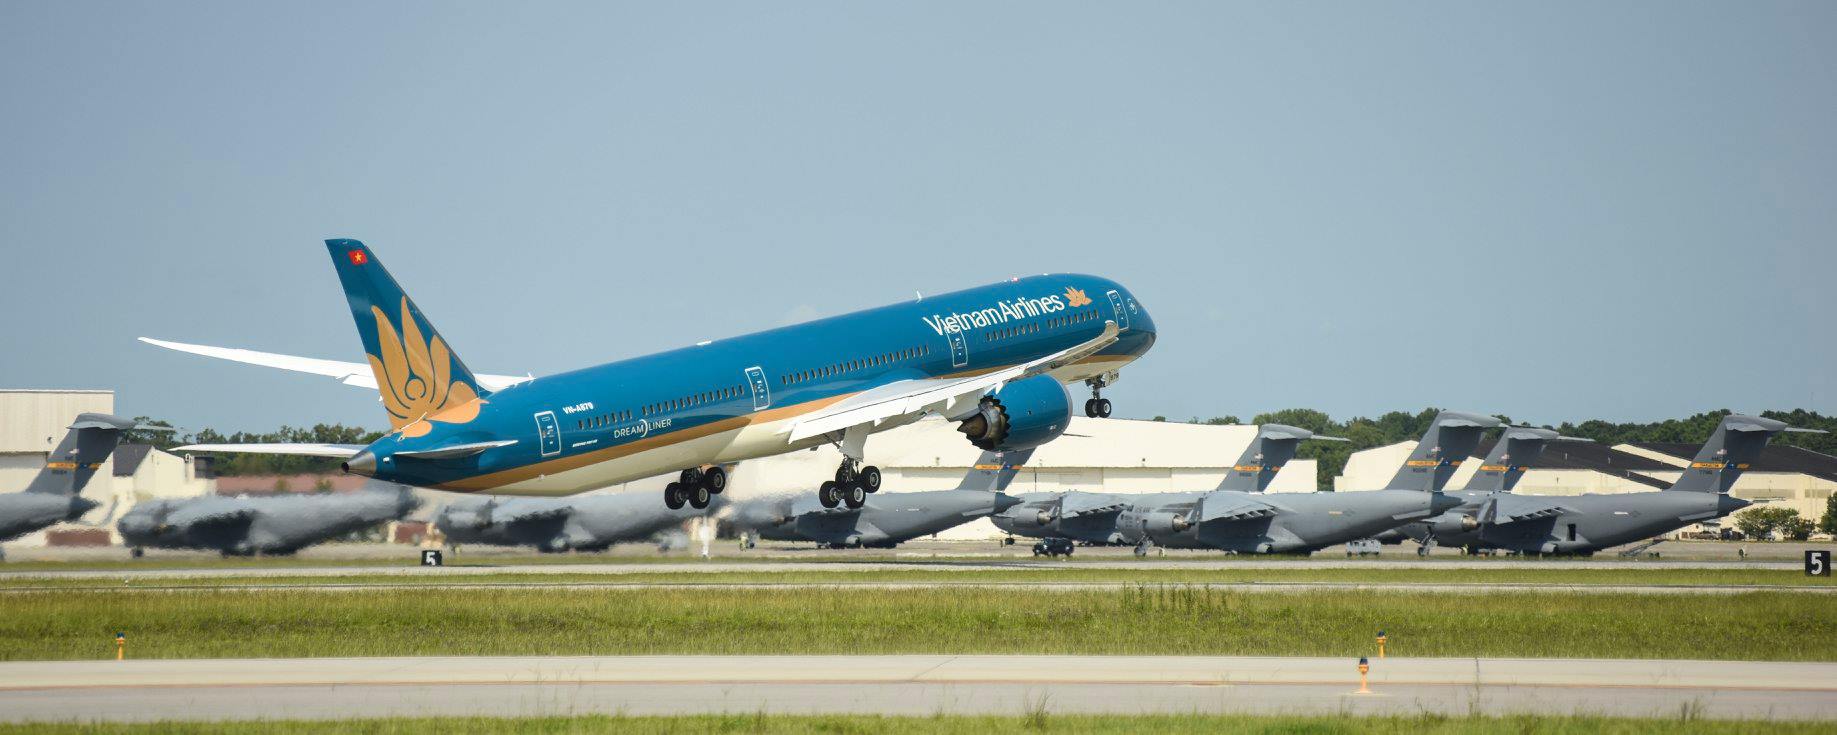 Vietnam Airlines Group carried 2.4 million passengers during Lunar New Year